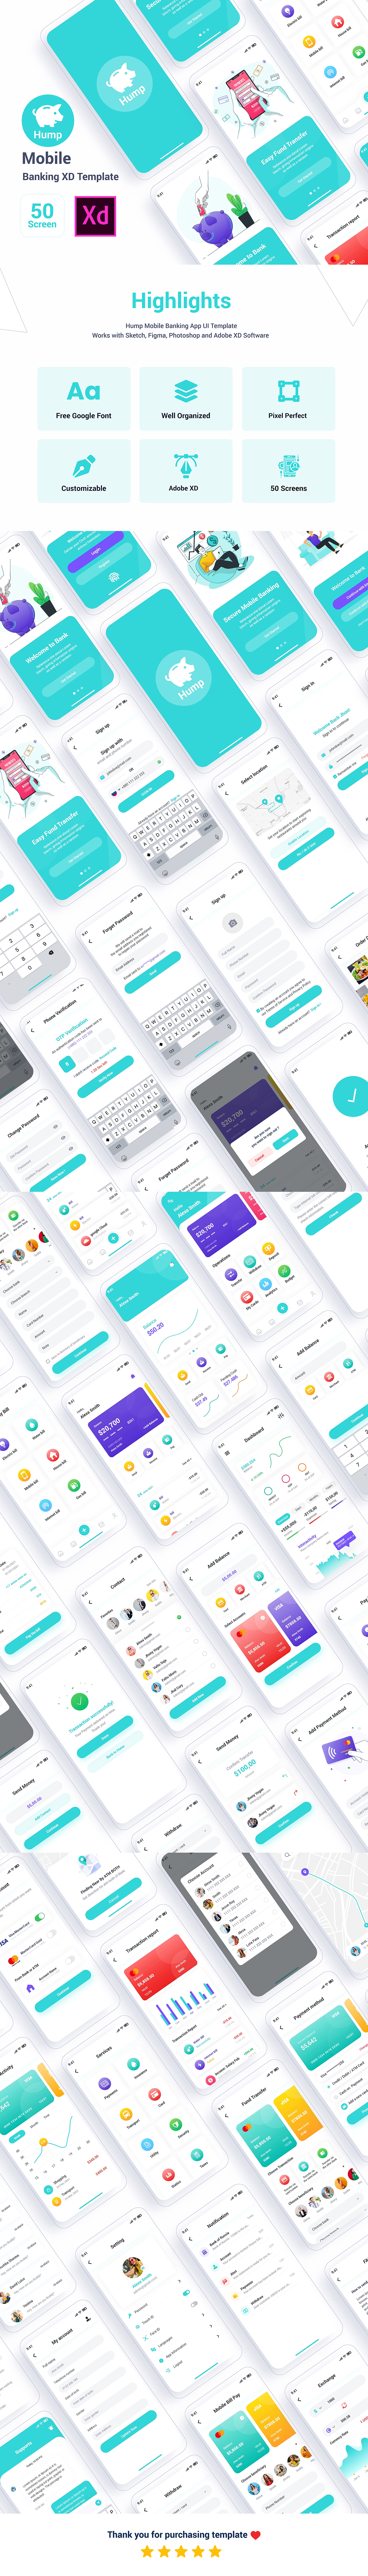 Hump – Mobile Banking Adobe XD Template - 1